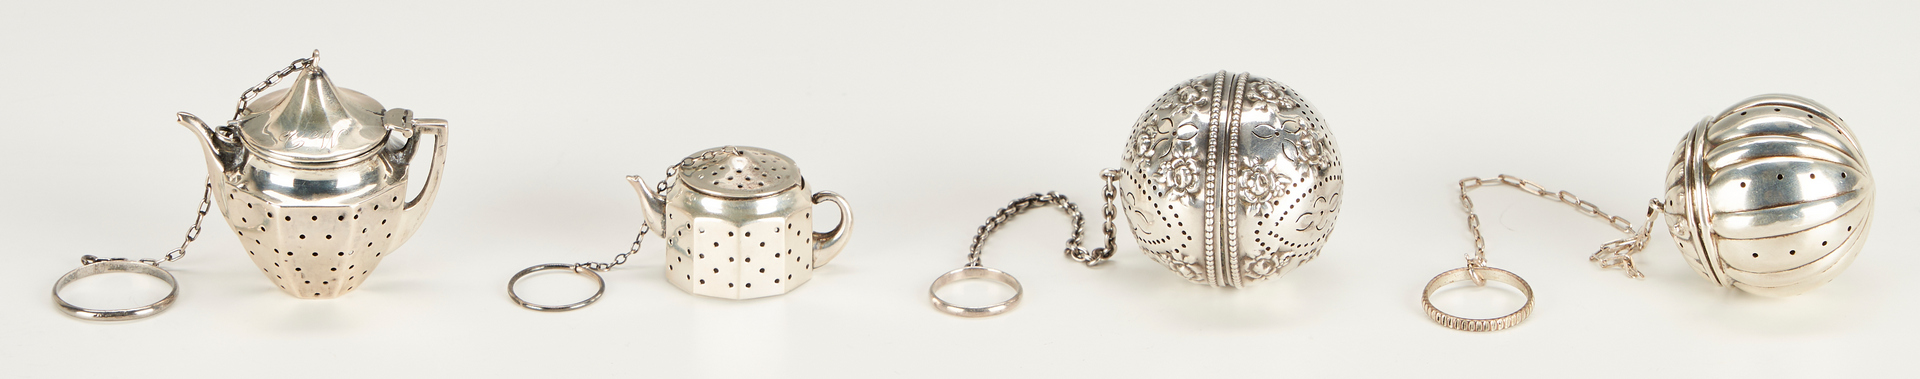 Lot 1251: 25 Asst. Sterling Silver Items, incl. Tea Strainers & Napkin Rings